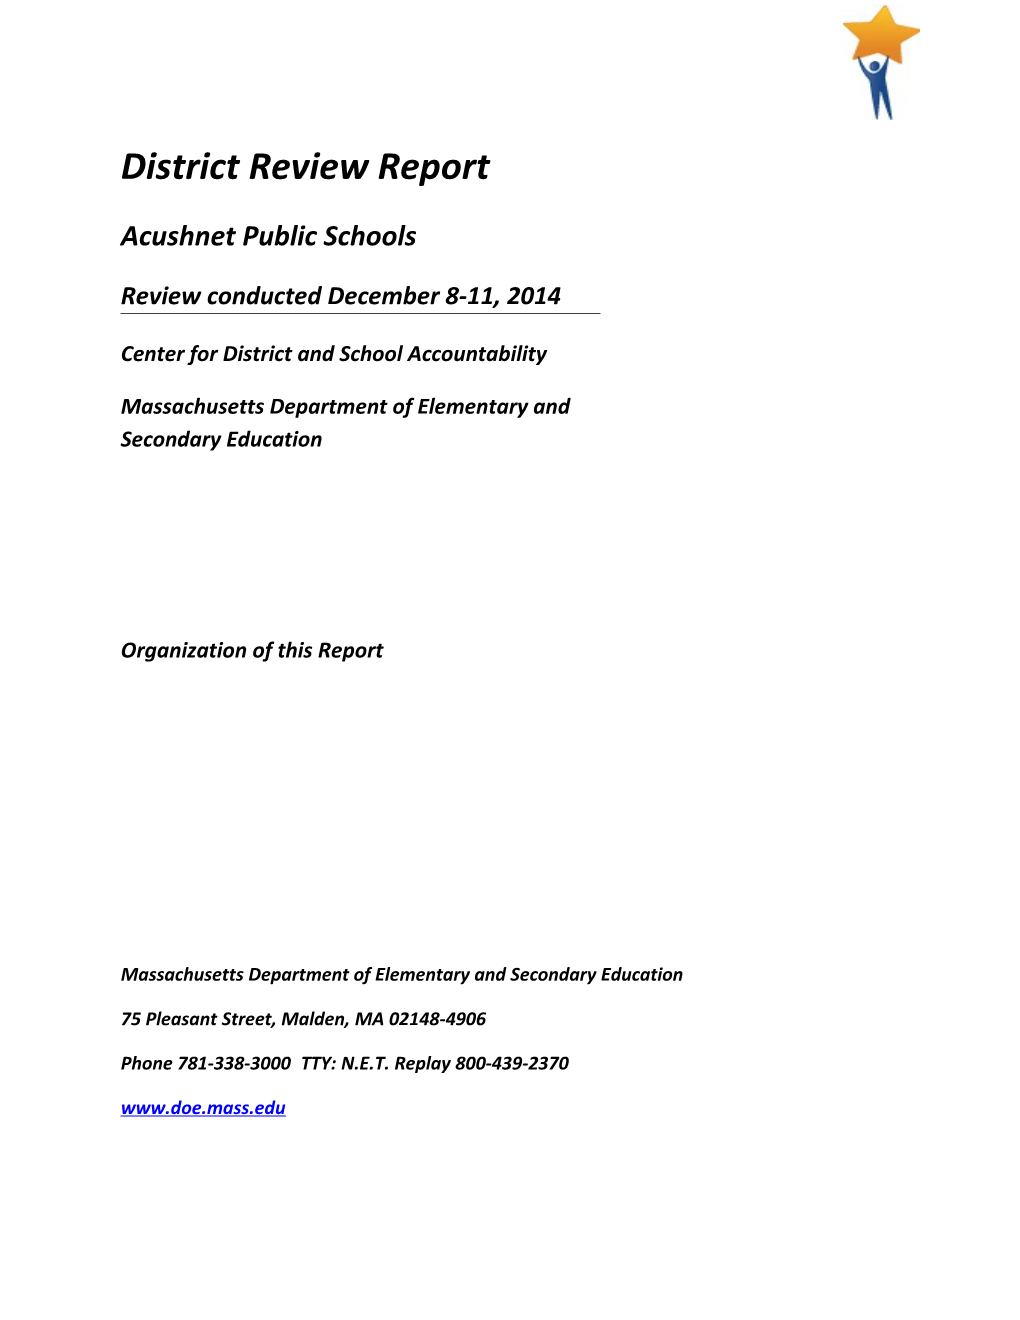 Acushnet District Review Report, 2015